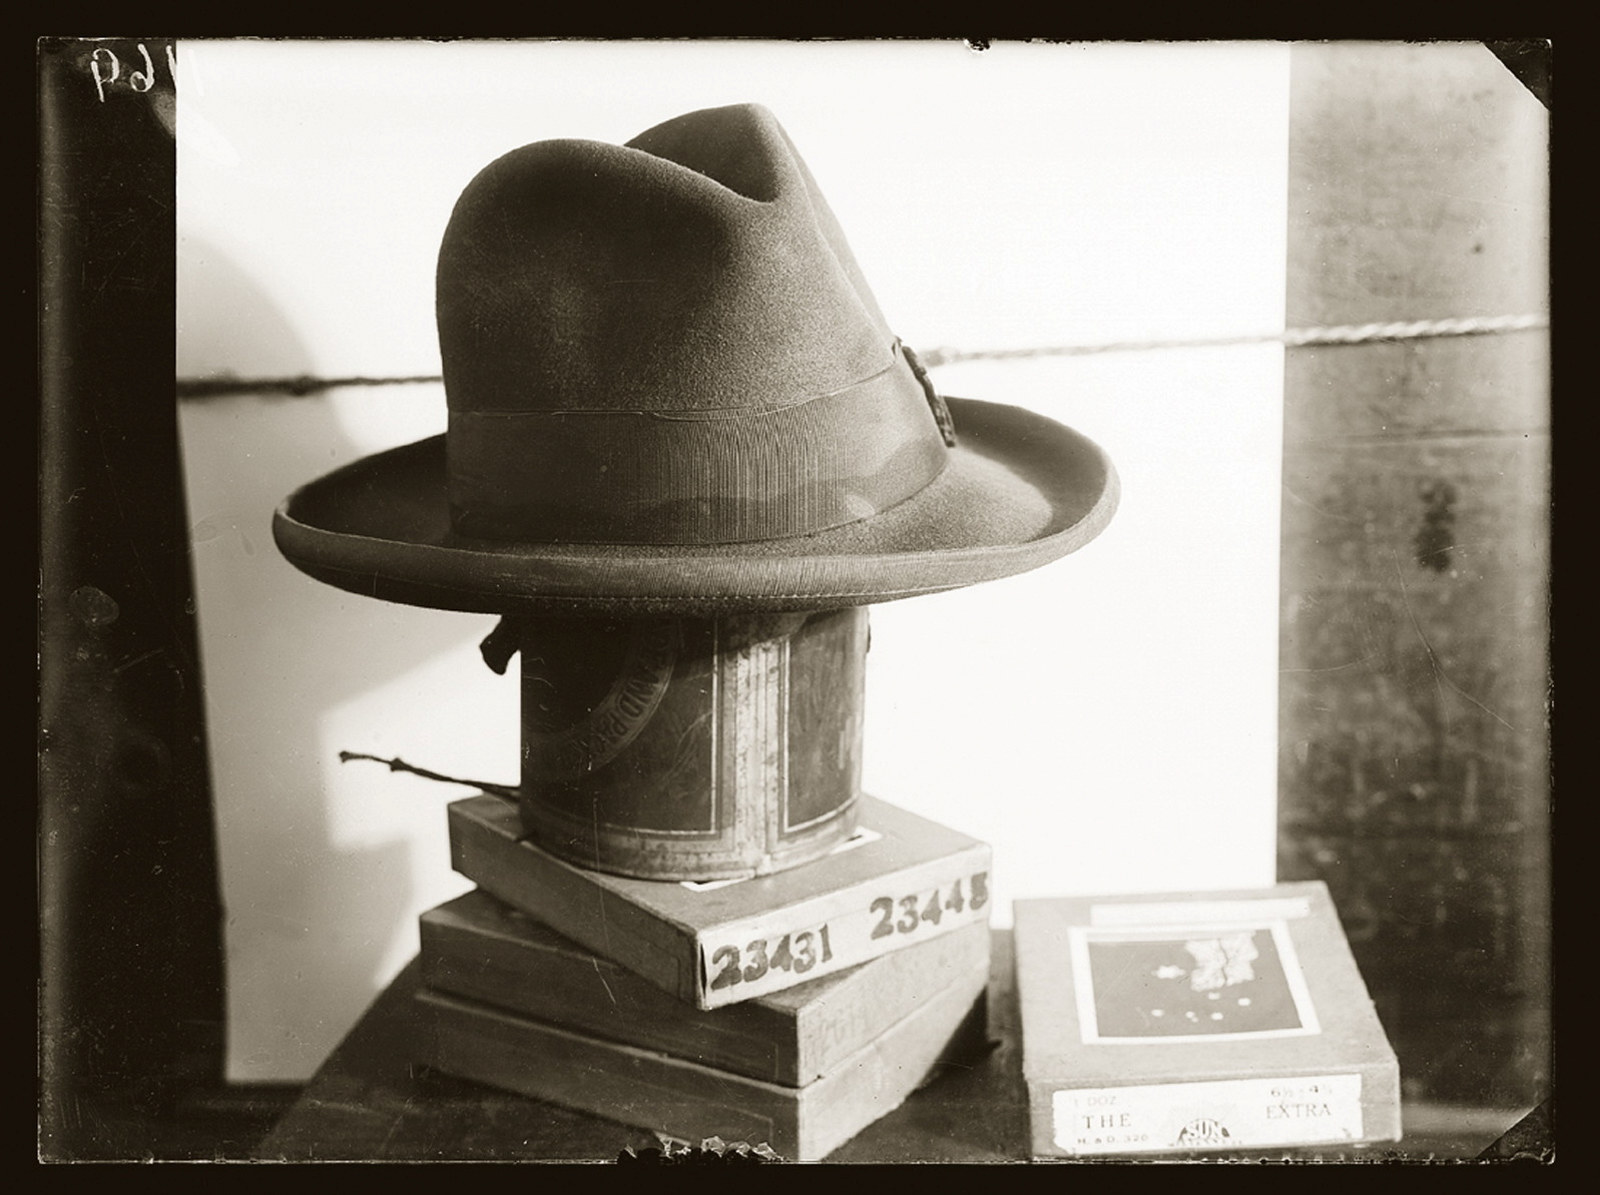 Man's sweat-stained Fedora hat, presumably evidence in a criminal matter, atop boxes of police negatives. Location and details unknown, but possibly CIB, Sydney, ca.1928.